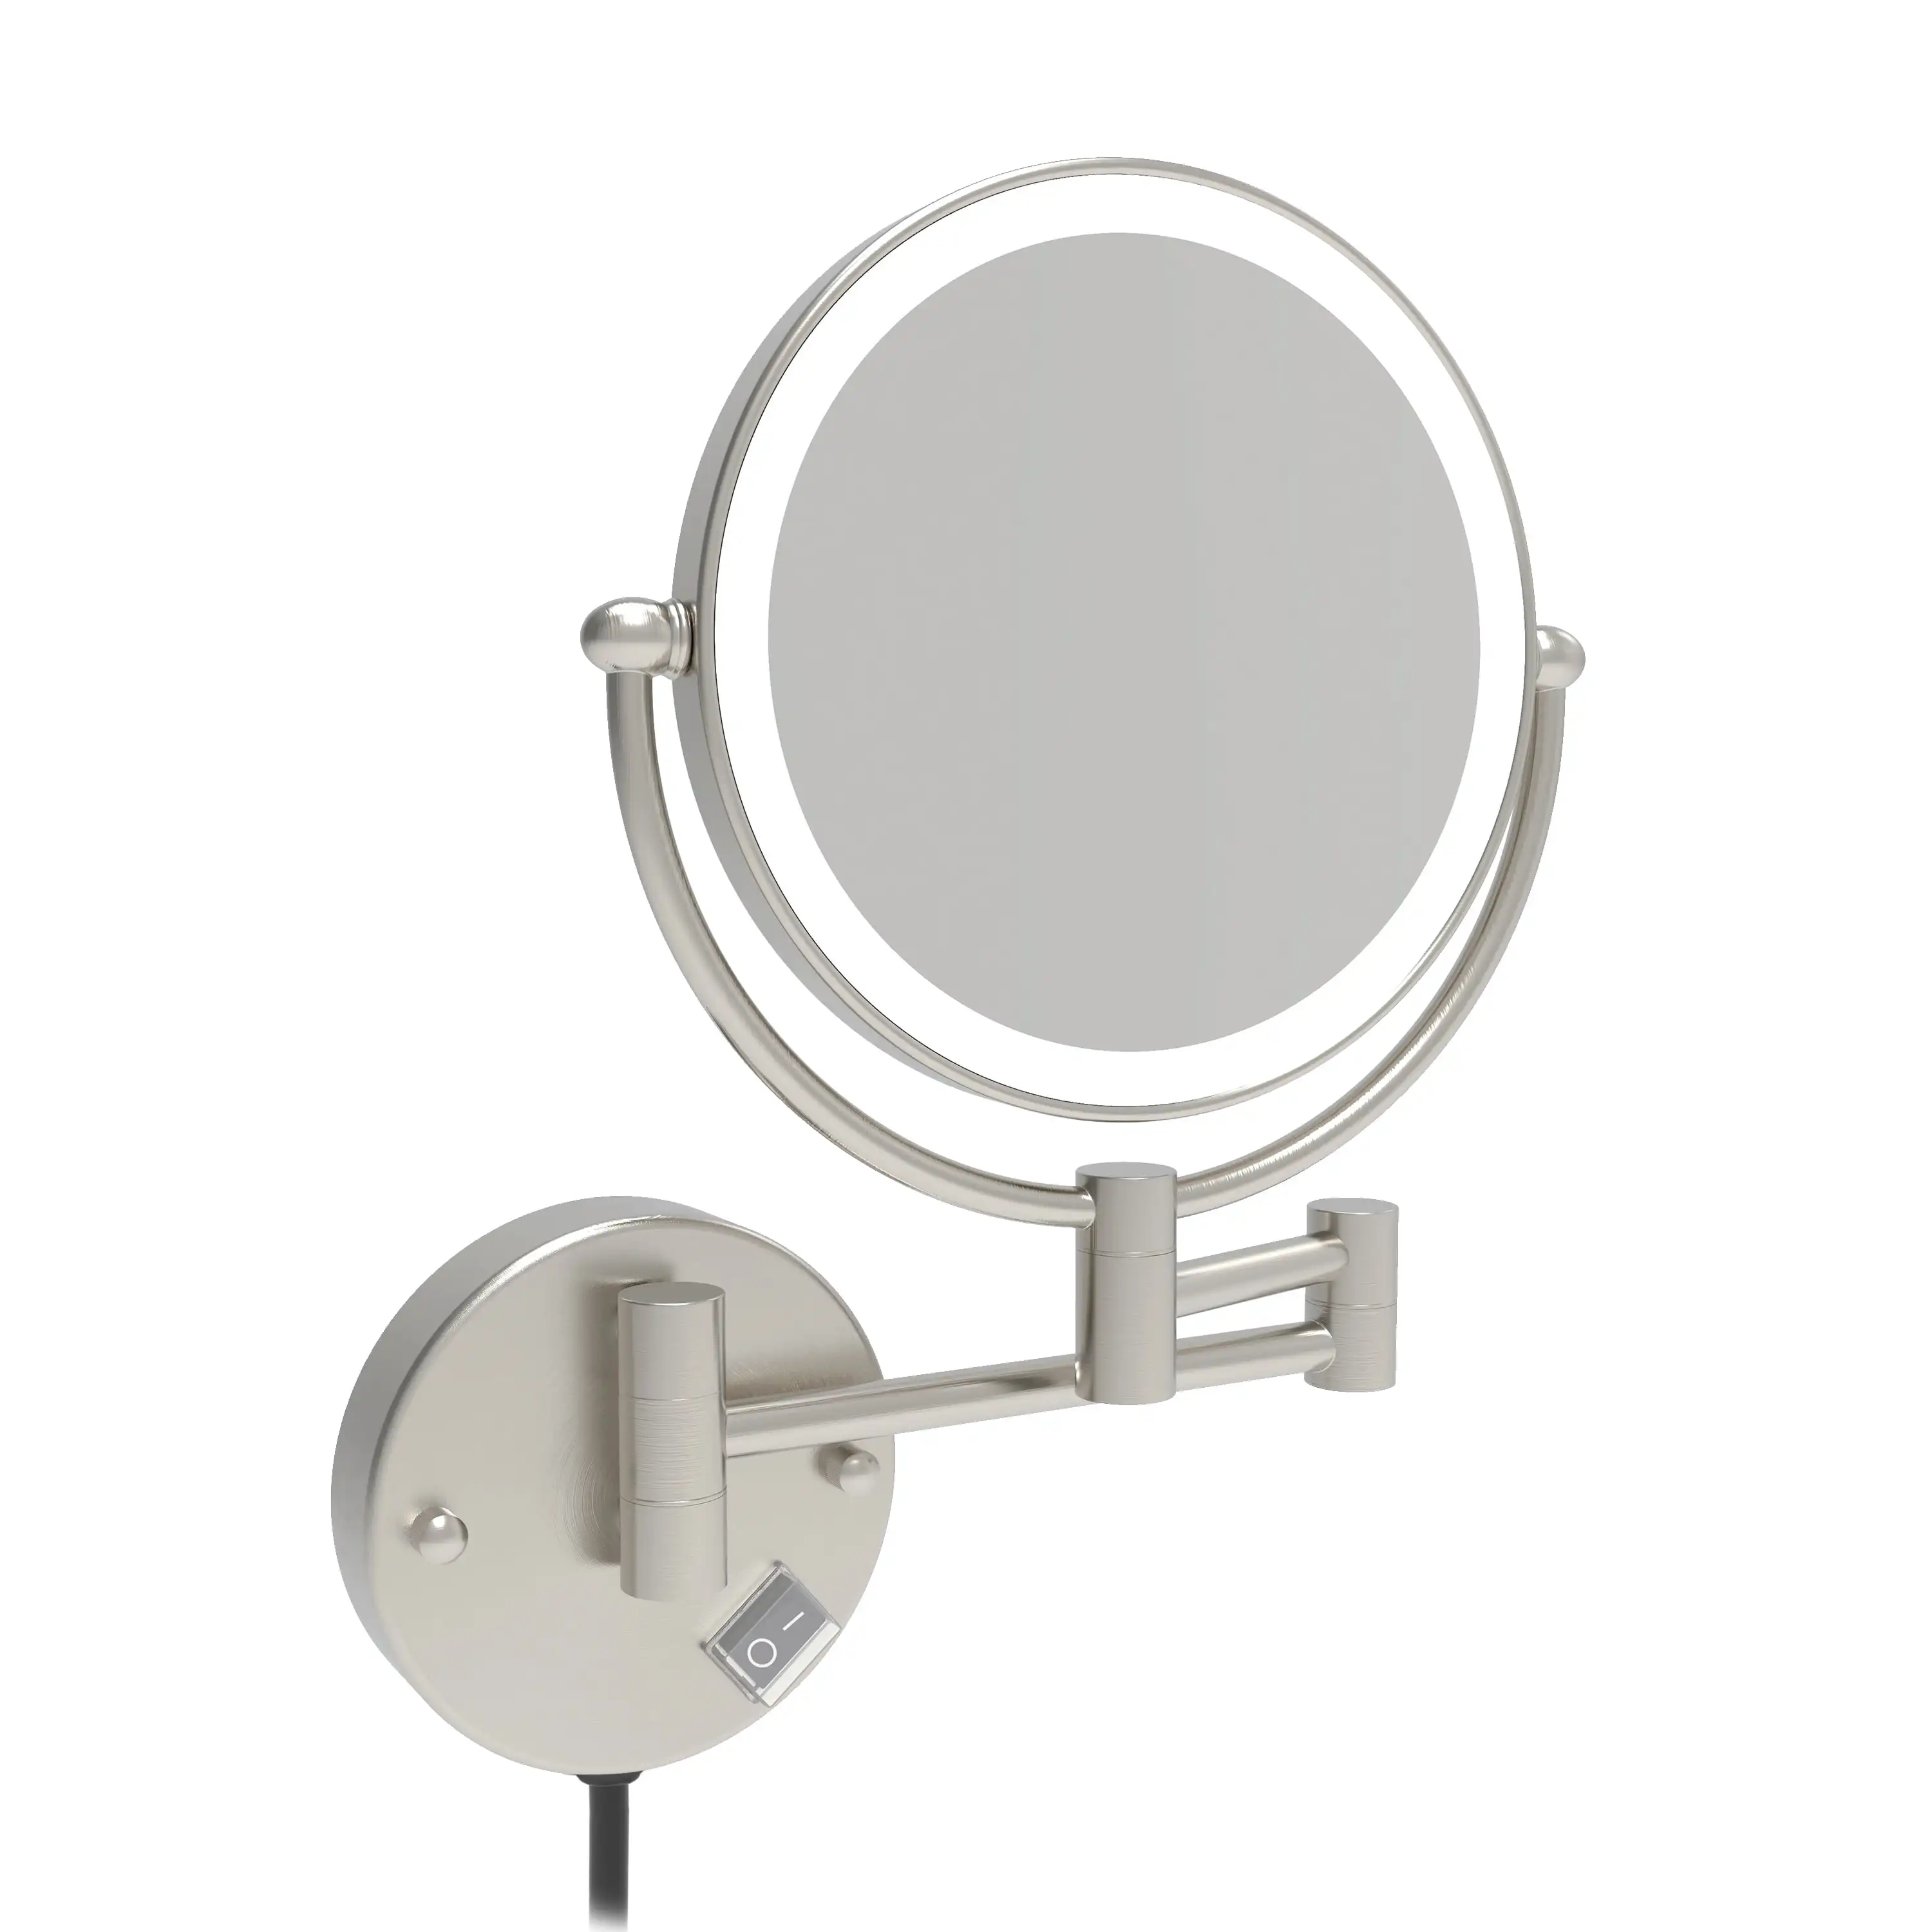 8'' LED Lighted Wall Mount Plug-in Two-Sided Makeup Vanity Mirror, Brushed Nickel, 1X/10X Magnification, by